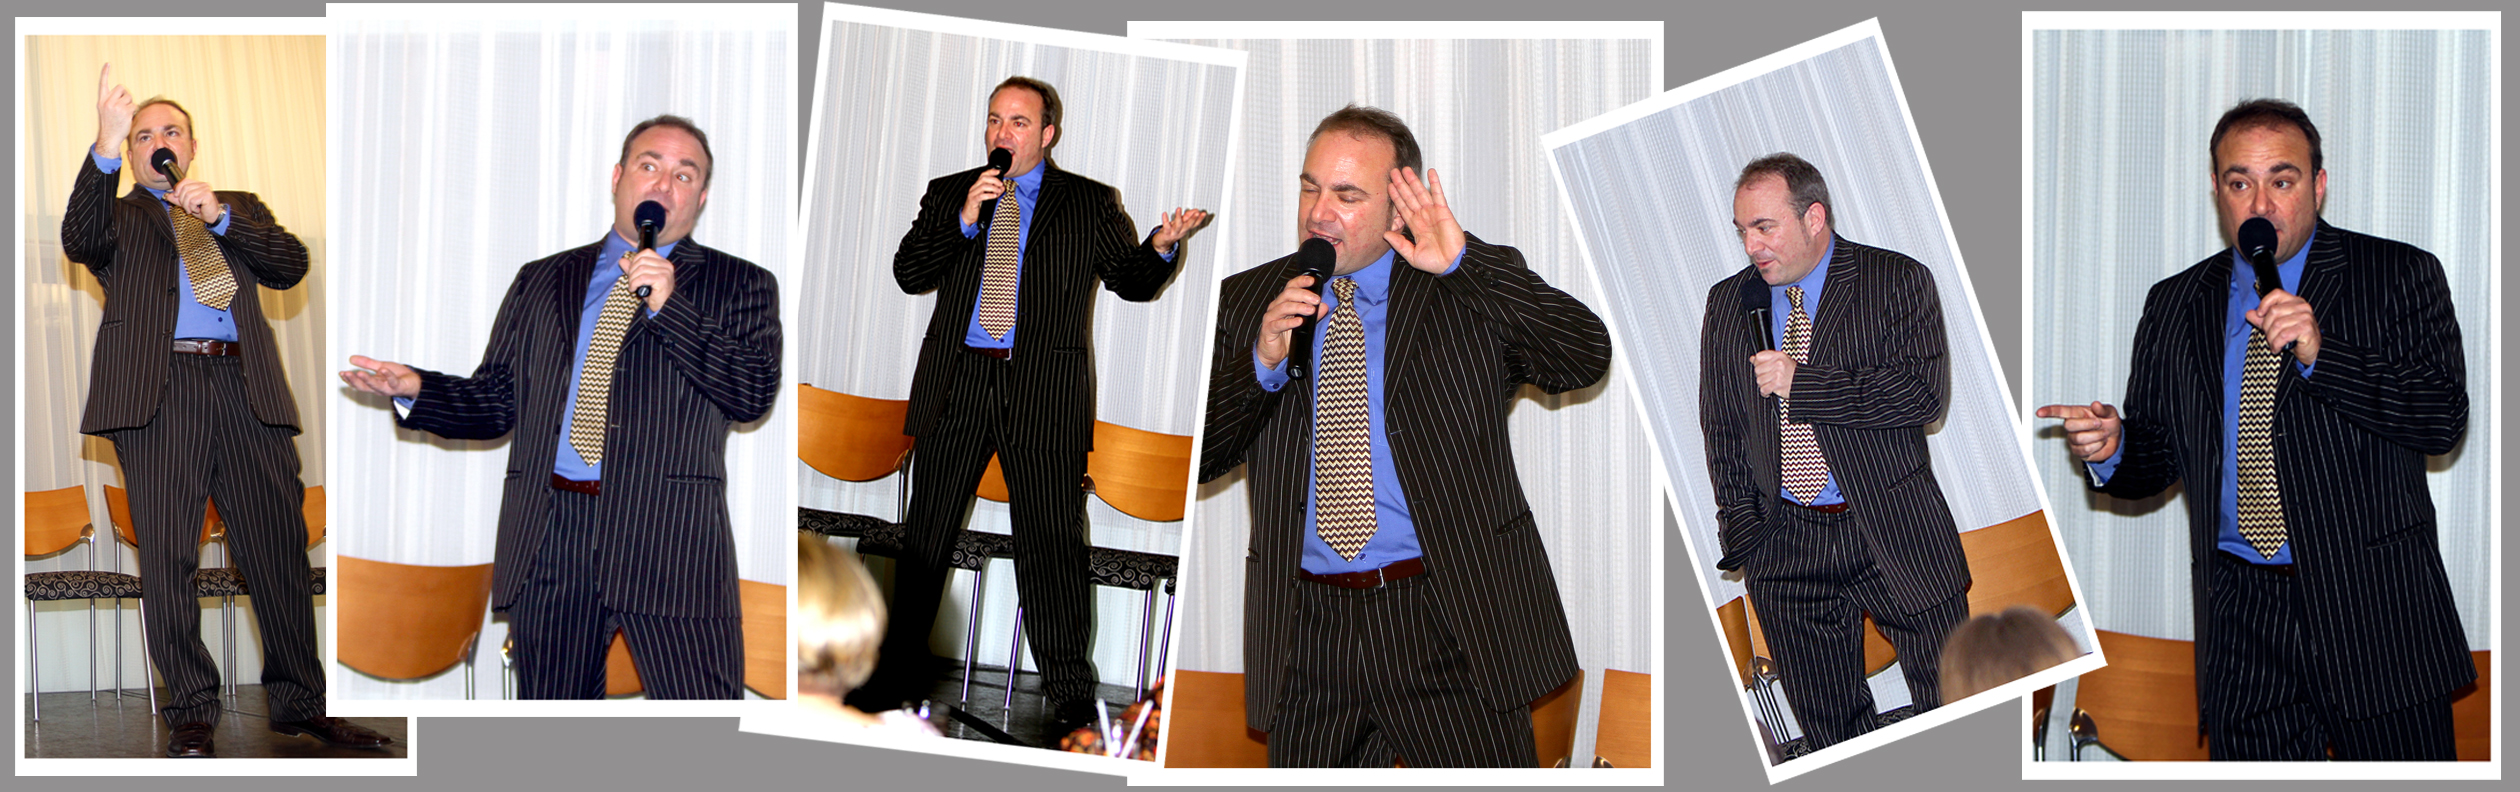 business event comedian